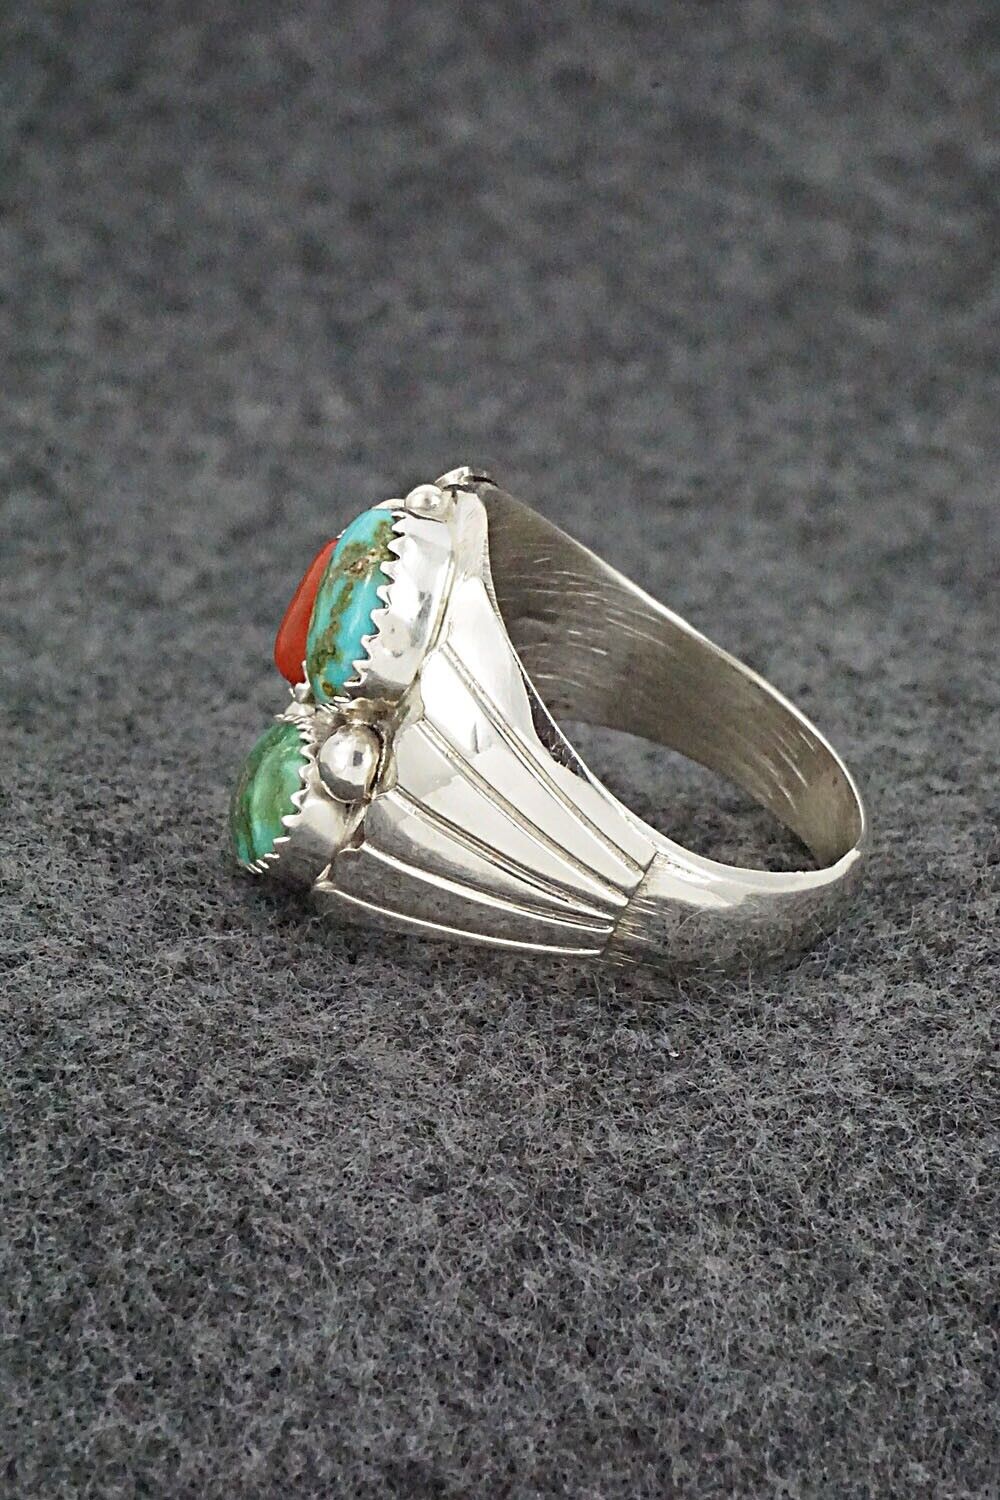 Turquoise, Coral and Sterling Silver Ring - Annie Spencer - Size 13.25